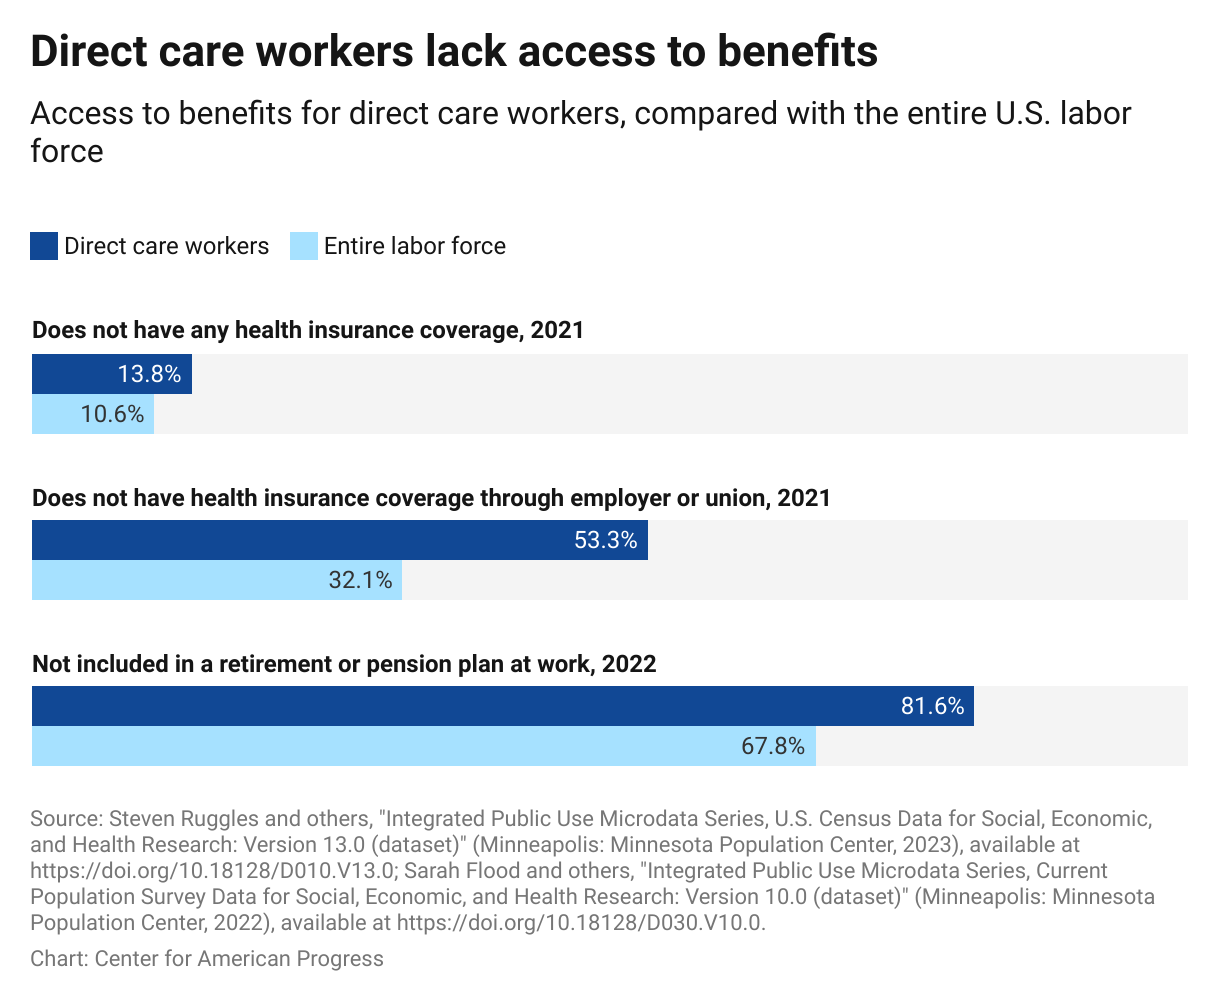 Bar chart showing that direct care workers have less access to benefits than the entire labor force; for example, in 2021, 10.61 percent of the entire labor force and 13.8 percent of direct care workers lacked access to any health insurance coverage.